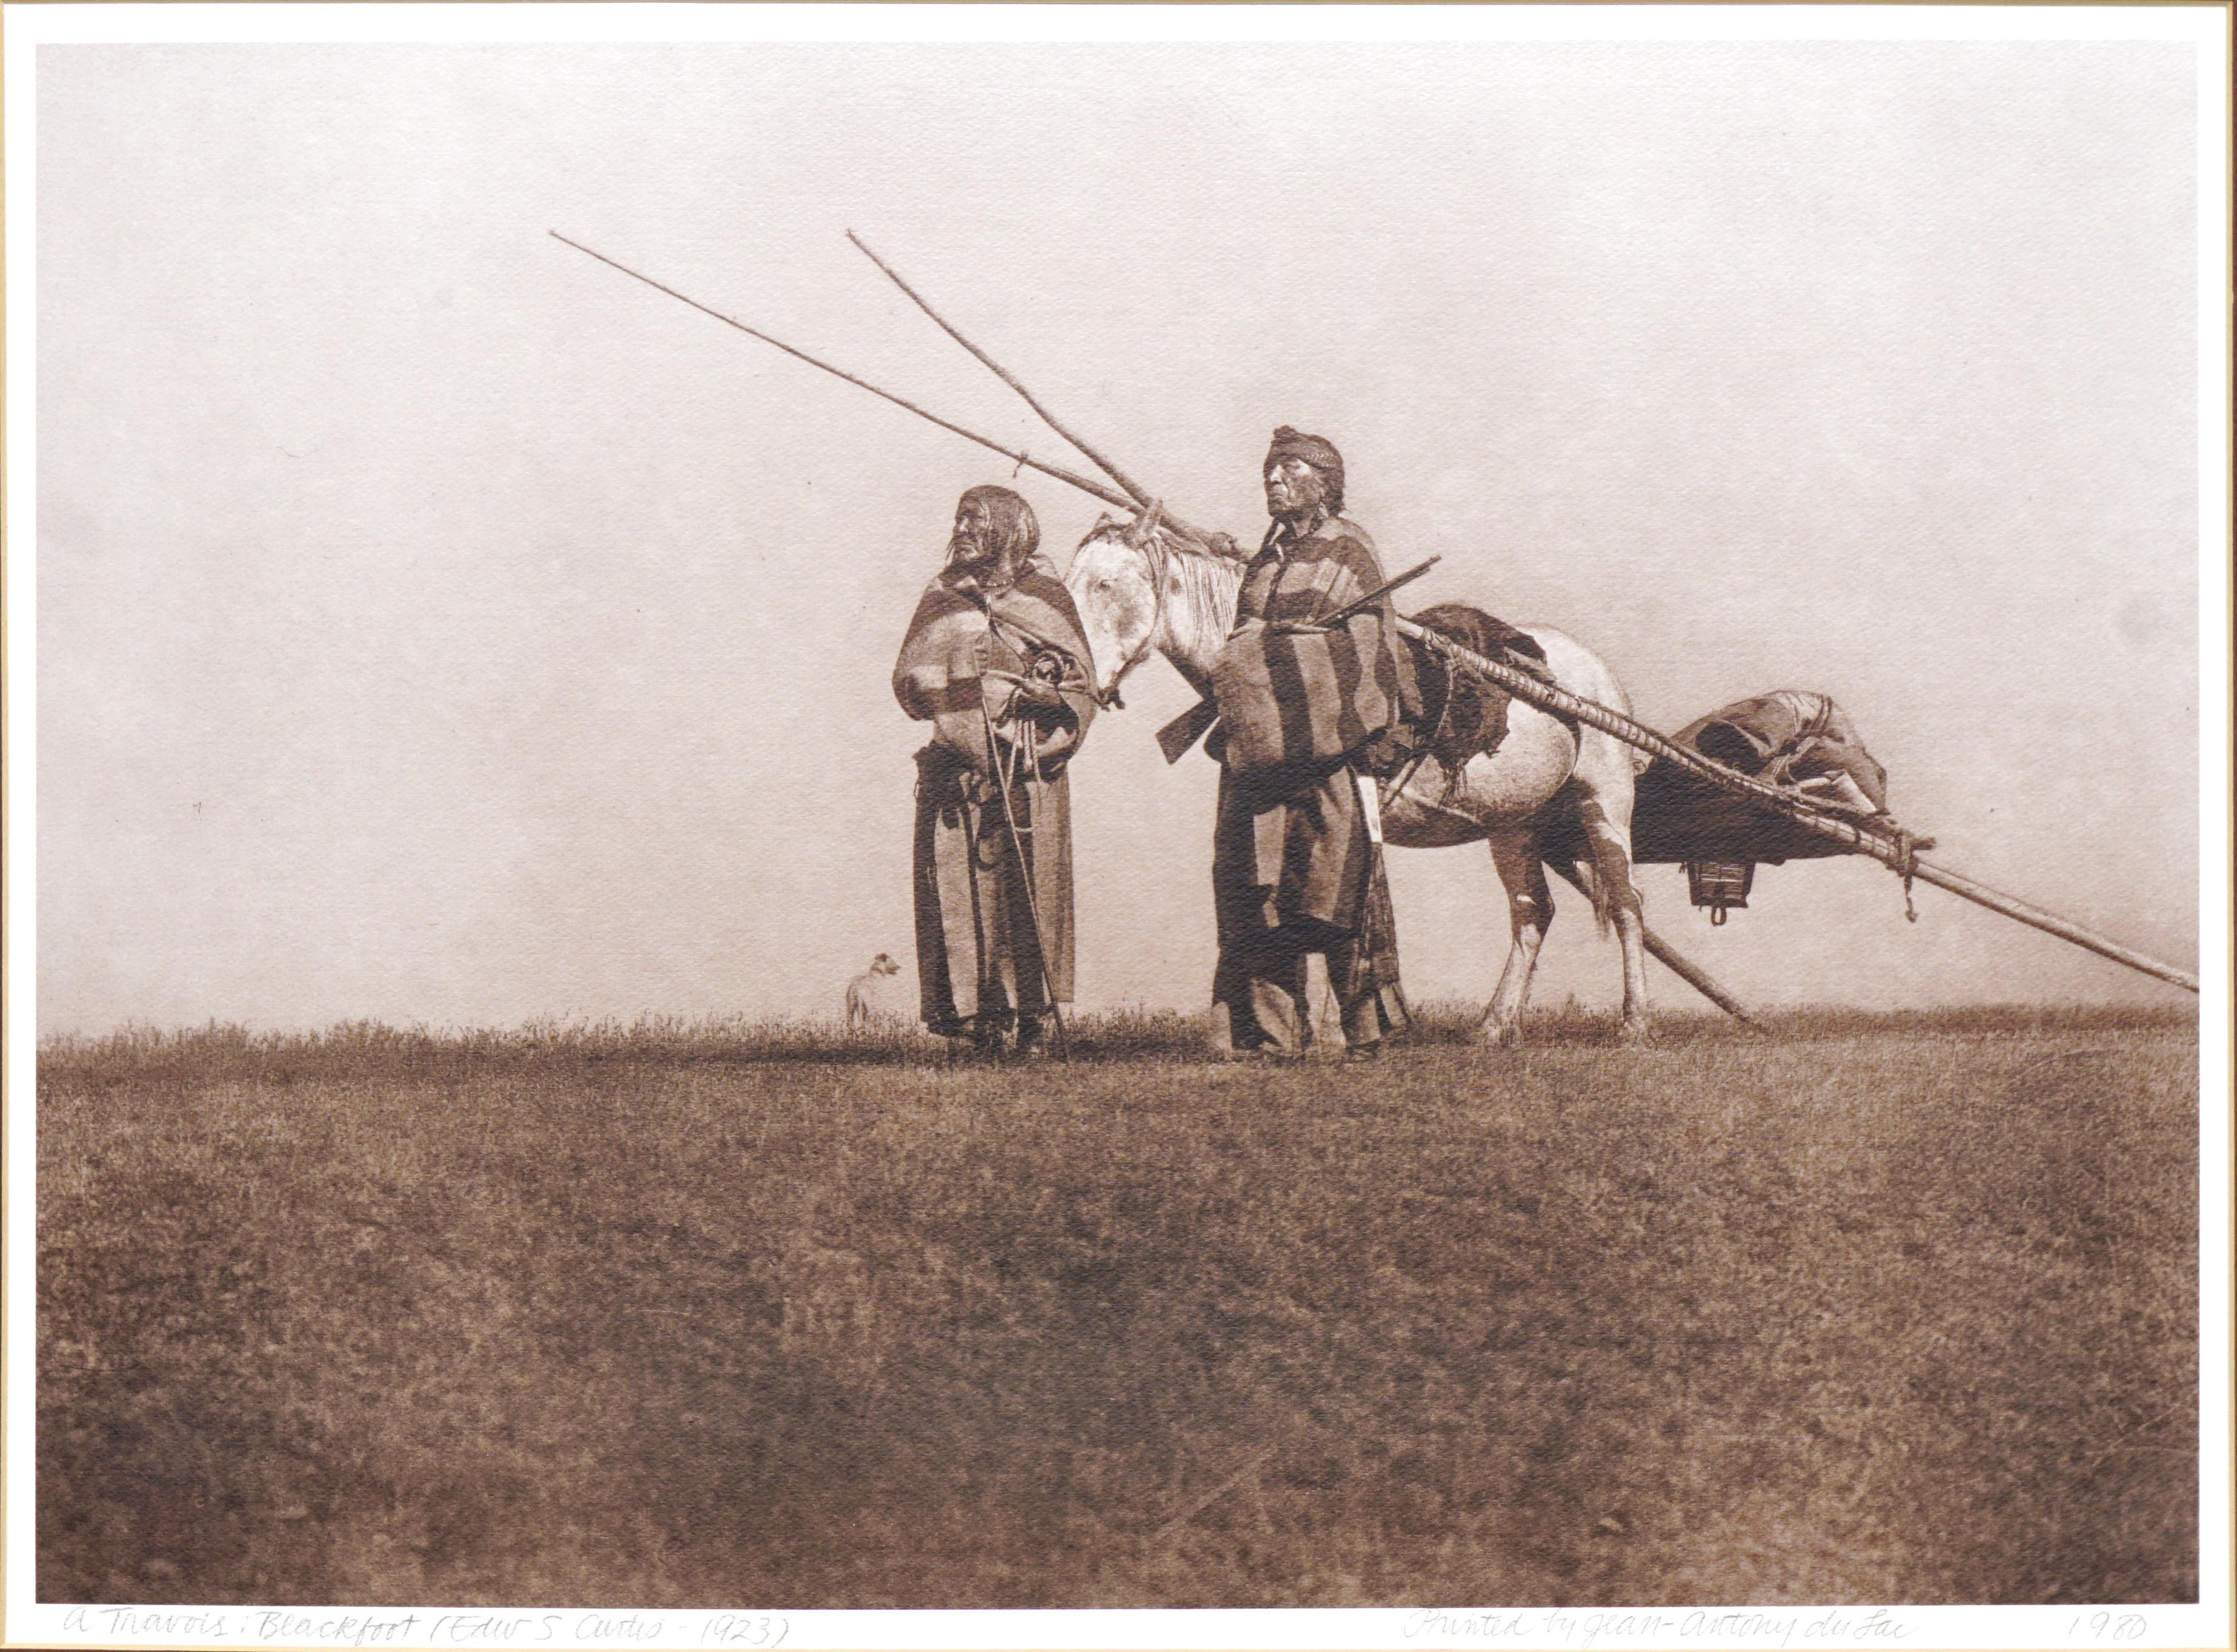 A Travois: Blackfoot - Photograph by Edward Sheriff Curtis